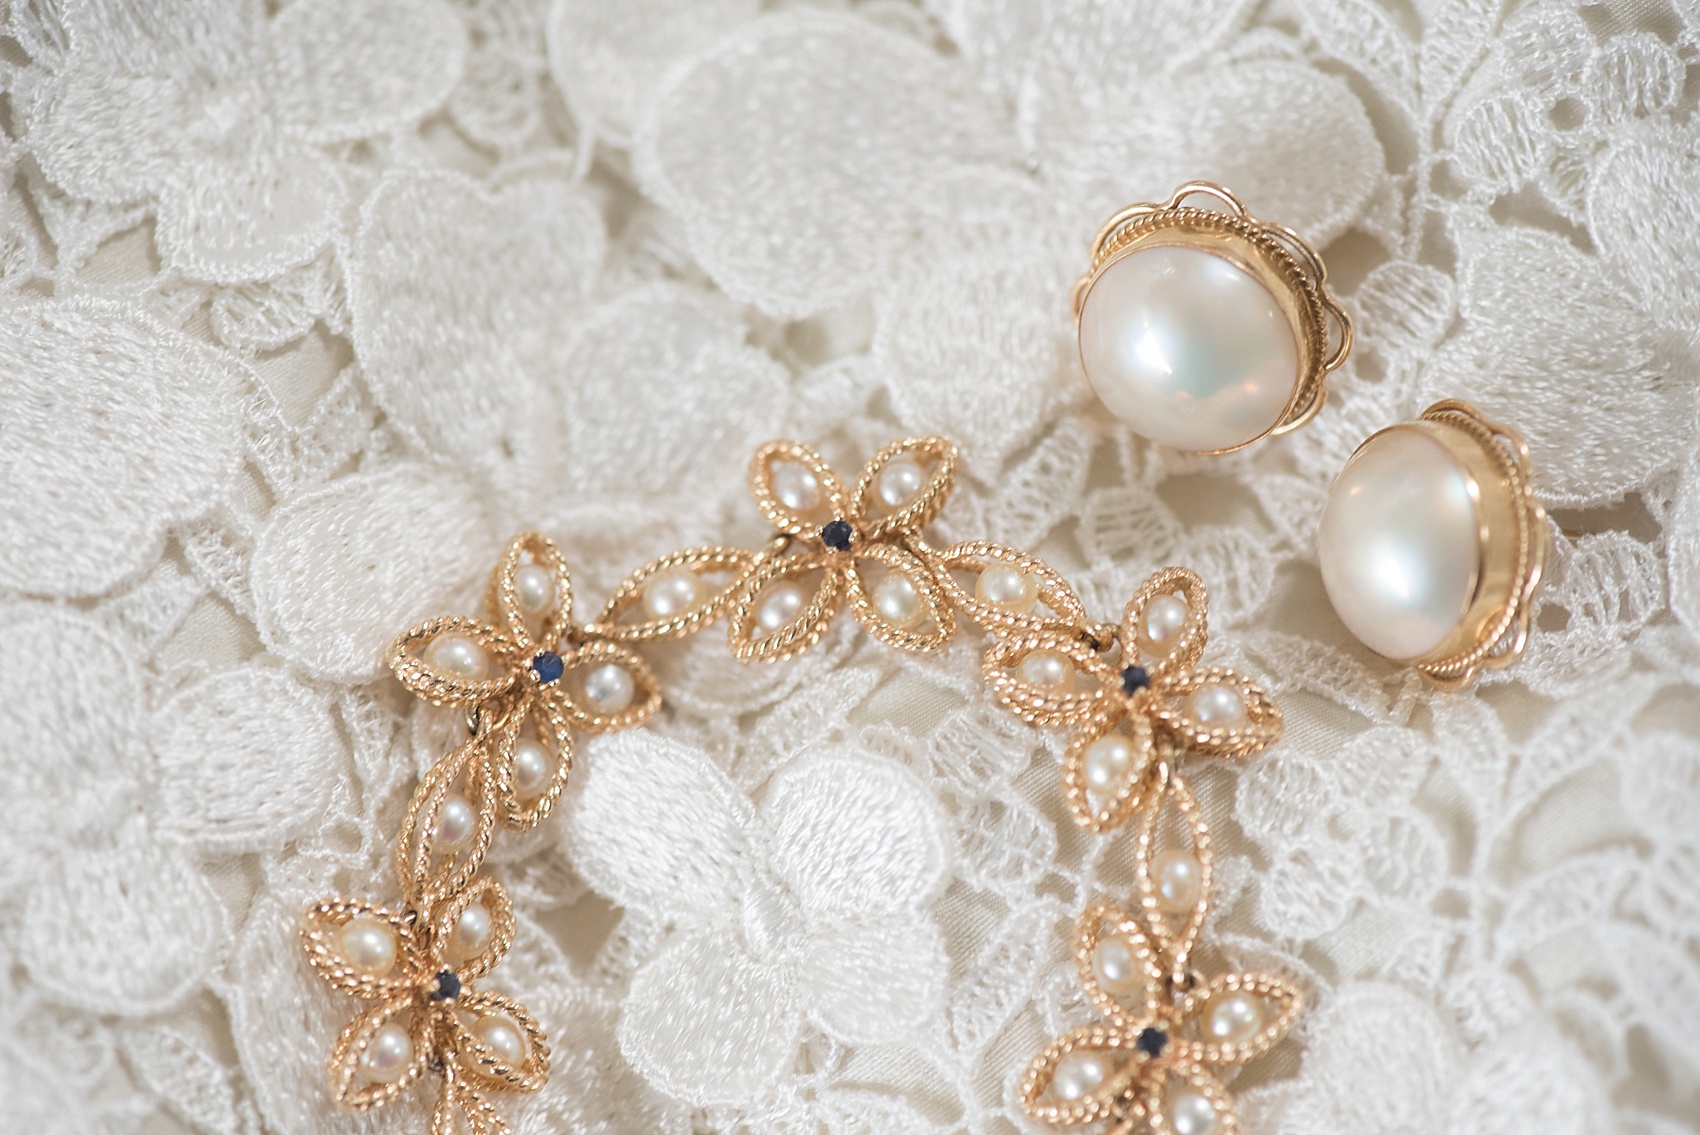 Wedding details - heirloom gold jewelry from the bride's grandmother. Images by NYC wedding photographer Mikkel Paige Photography.